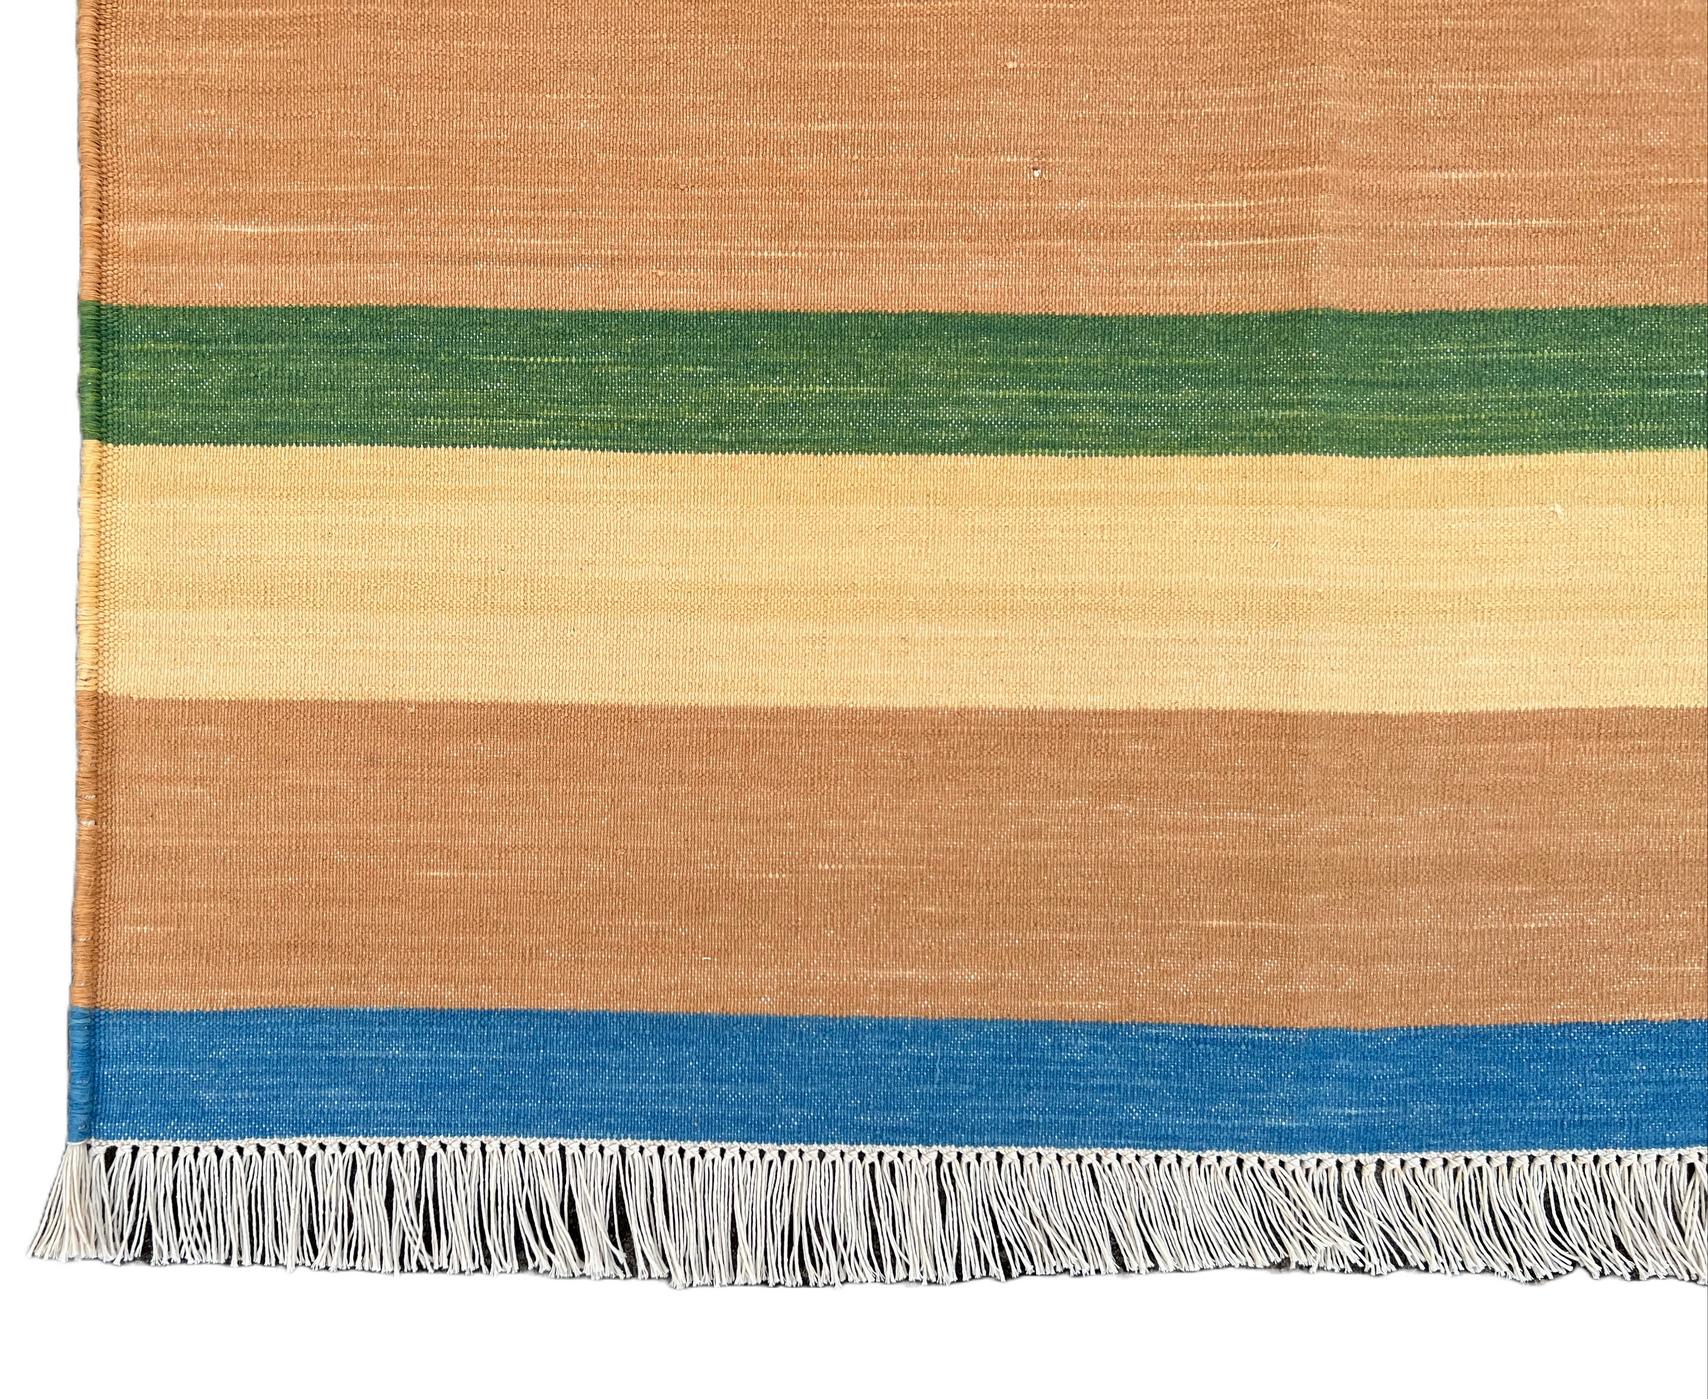 Handmade Cotton Area Flat Weave Rug, 6x9 Tan, Blue And Green Striped Dhurrie Rug In New Condition For Sale In Jaipur, IN